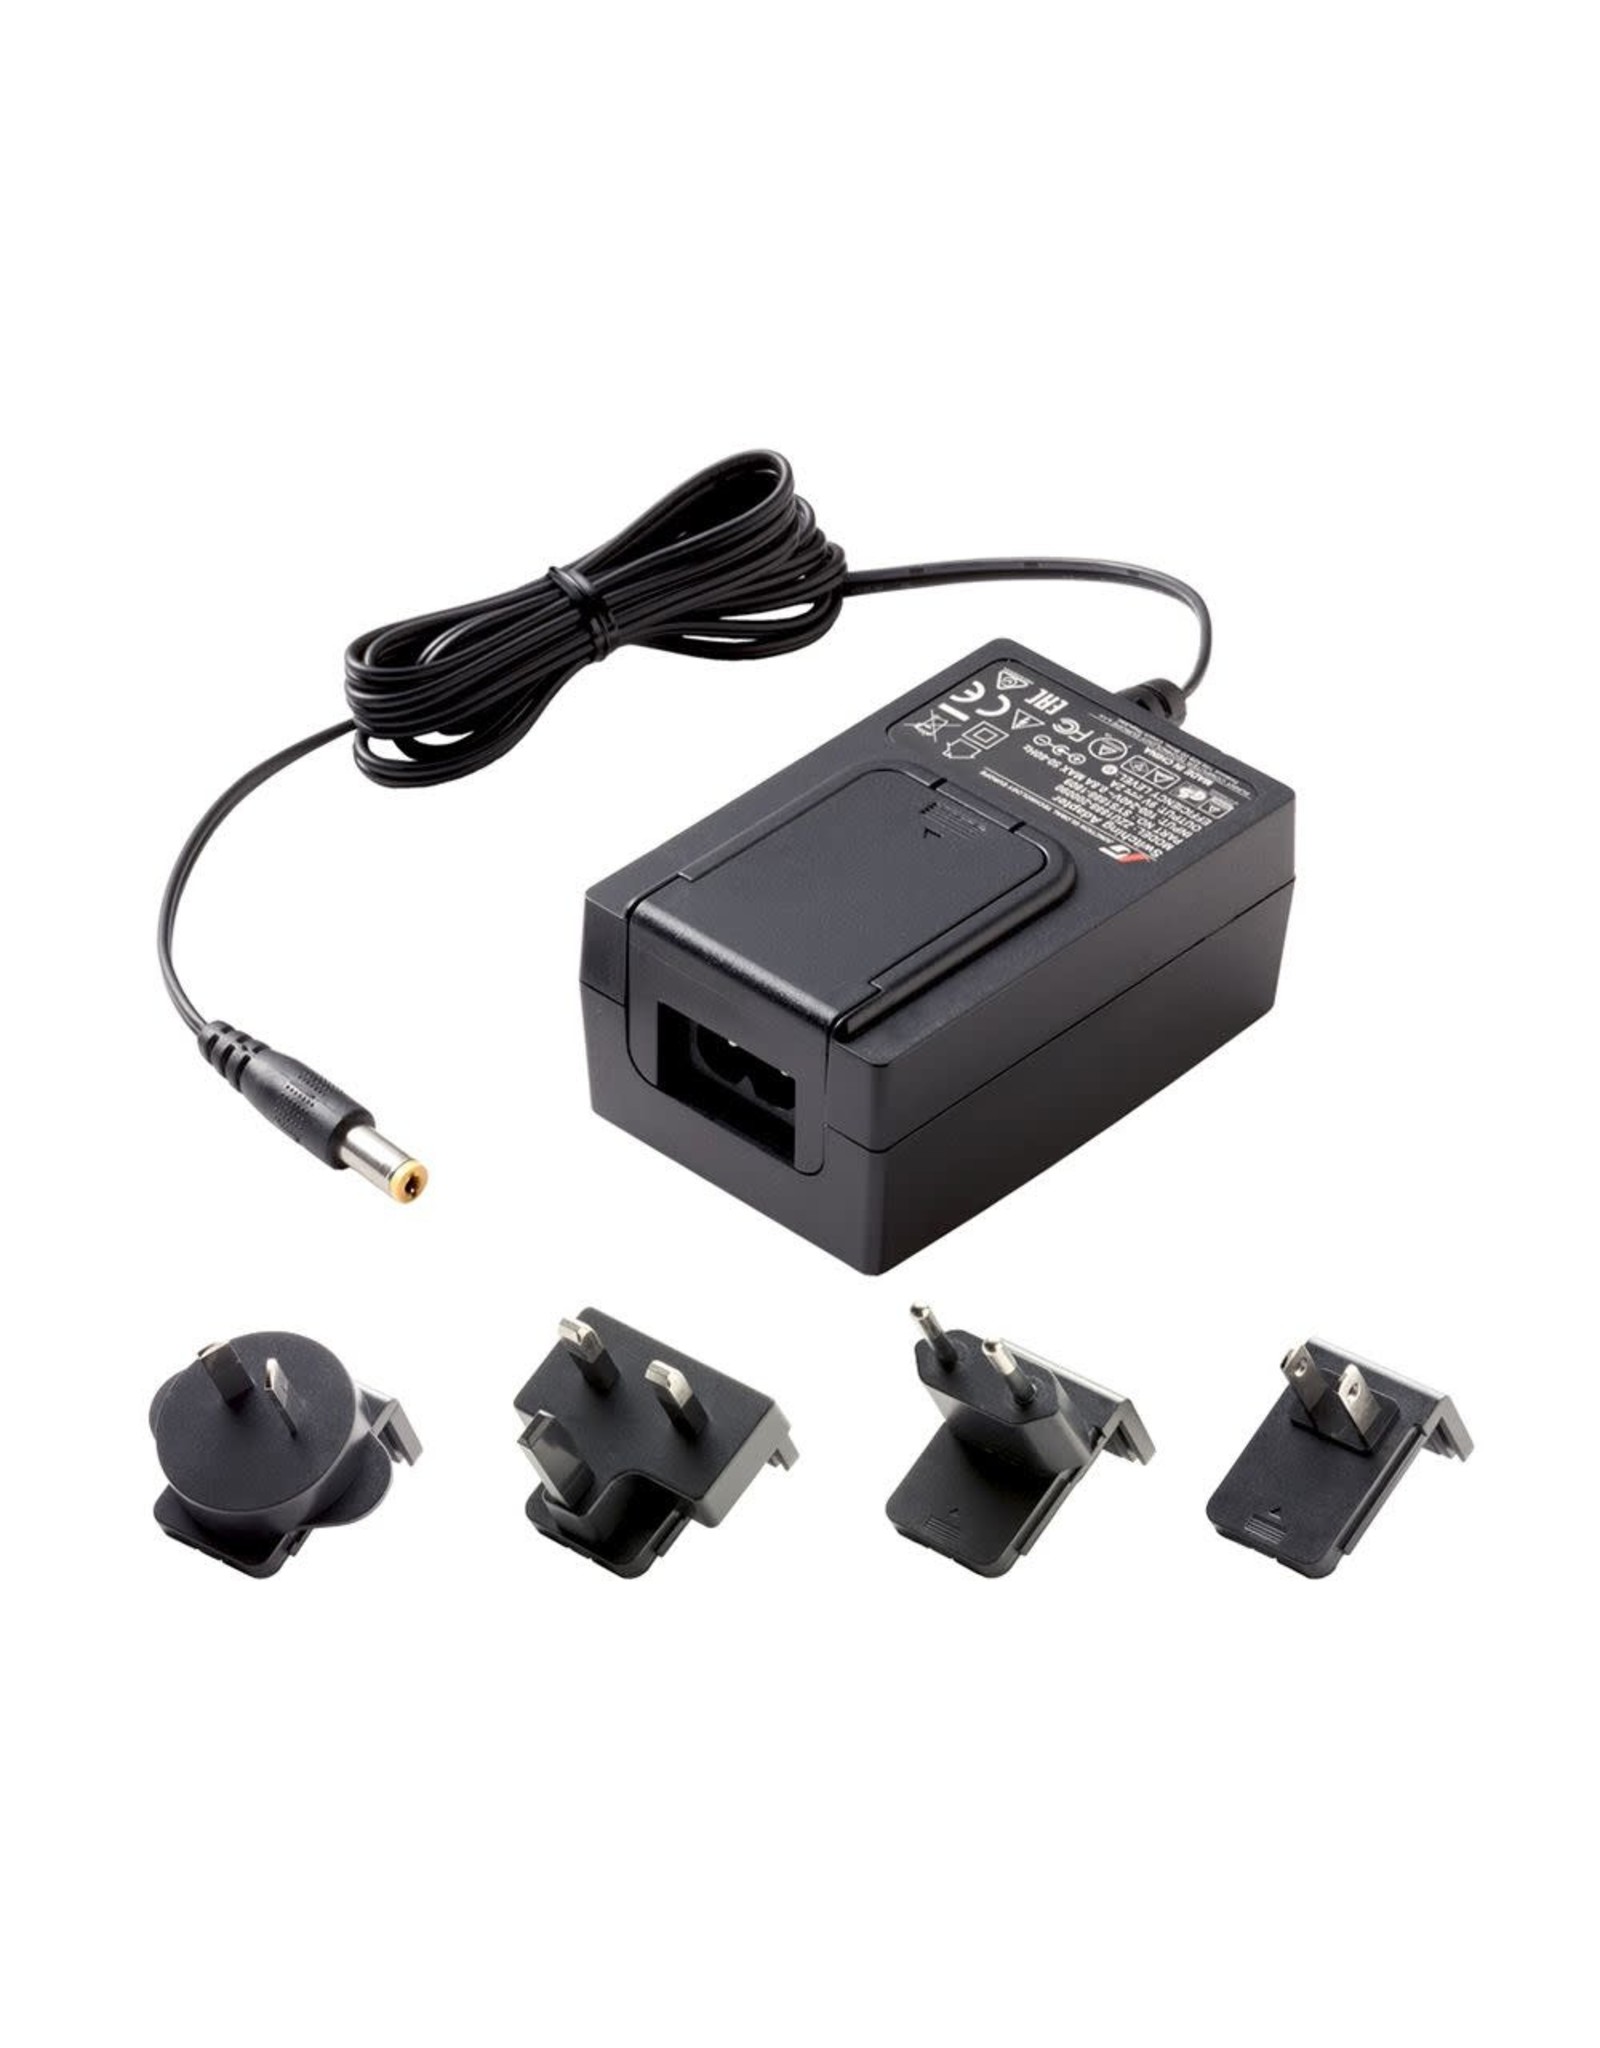 Pegasus Astro Pegasus Astro 12V/1.5A Power Supply for Falcon Rotator and Motor Products - PEG-PSU-1215